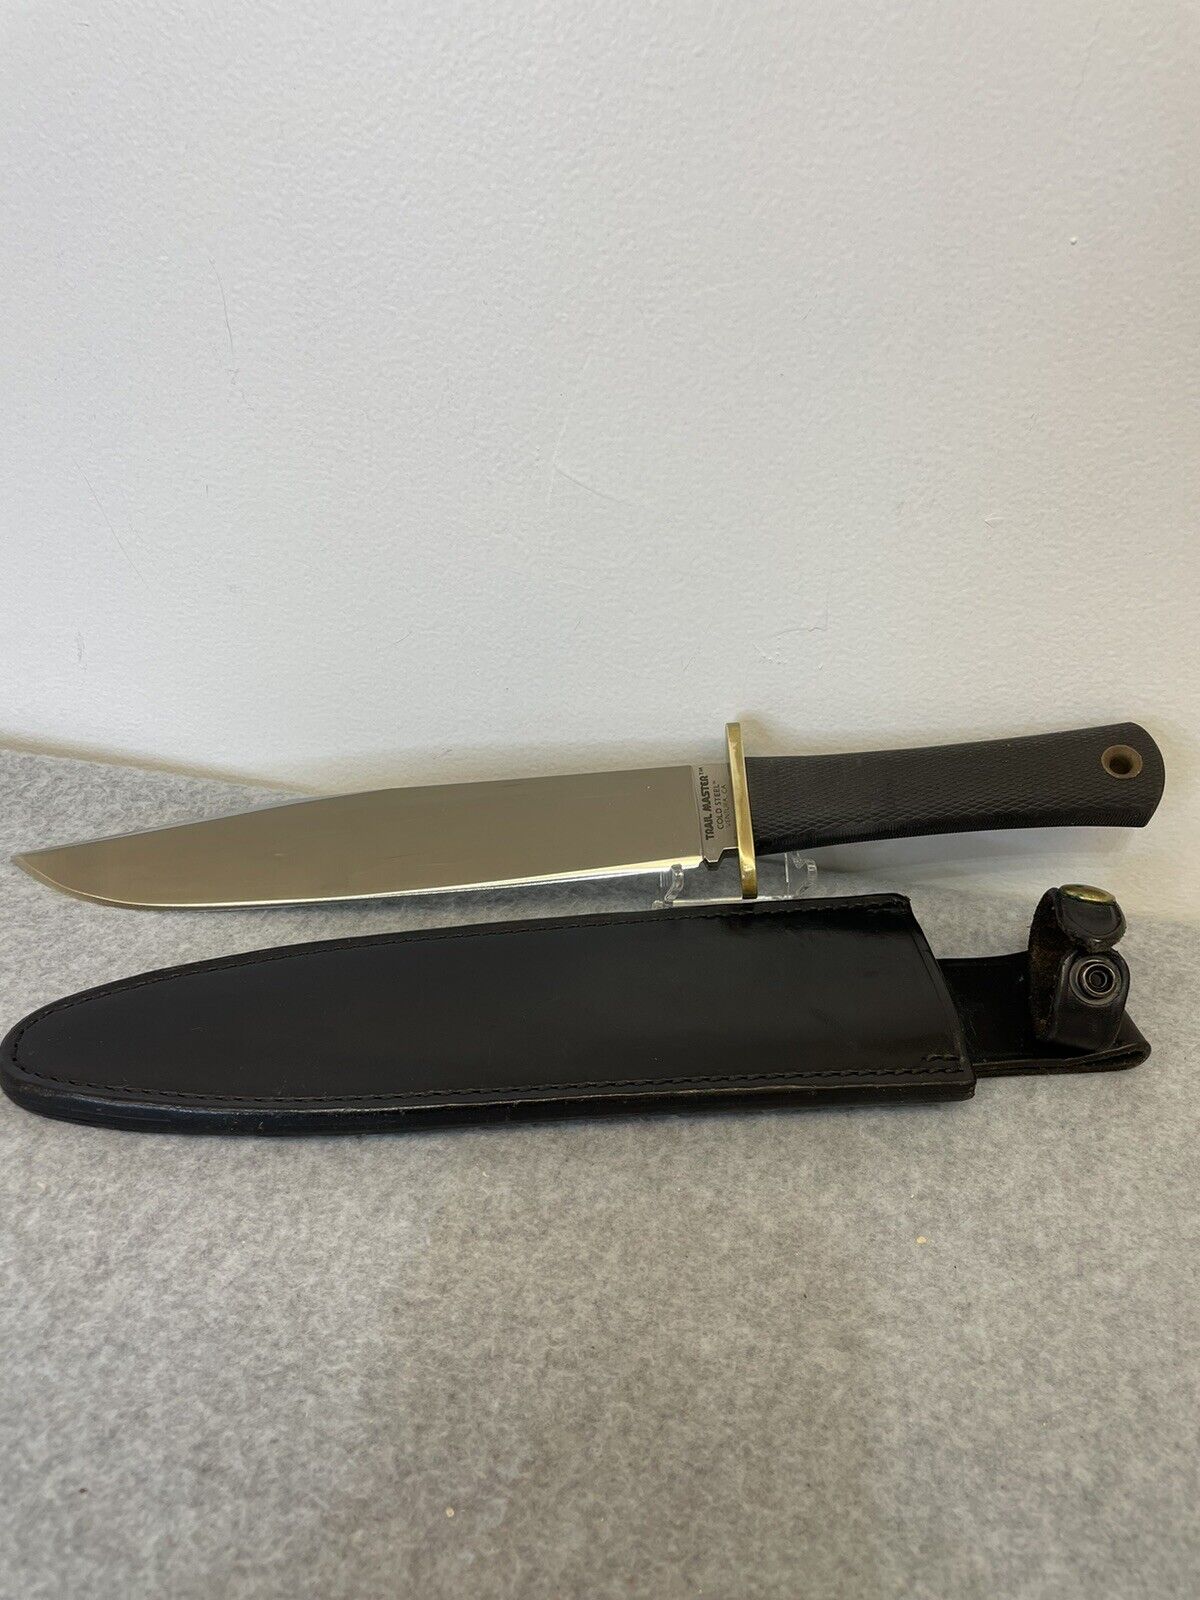 VINTAGE COLD STEEL TRAIL MASTER CARBON V BOWIE KNIFE WITH SHEATH MADE IN THE USA